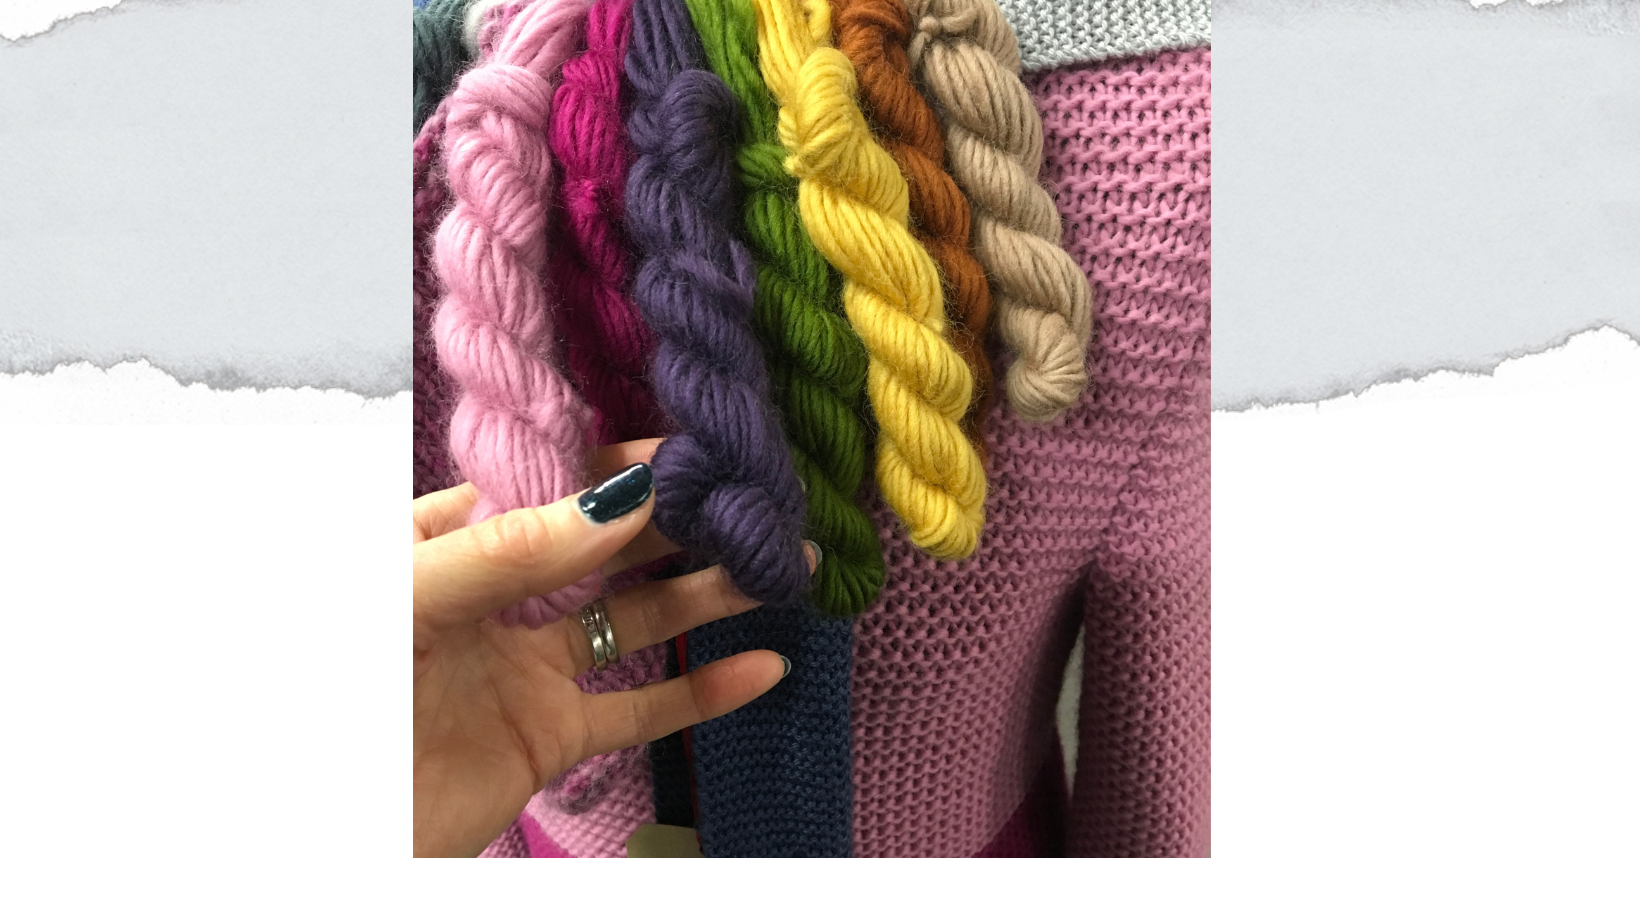 skeins of yarn hanging over a clothes dummy, with a hand holding them